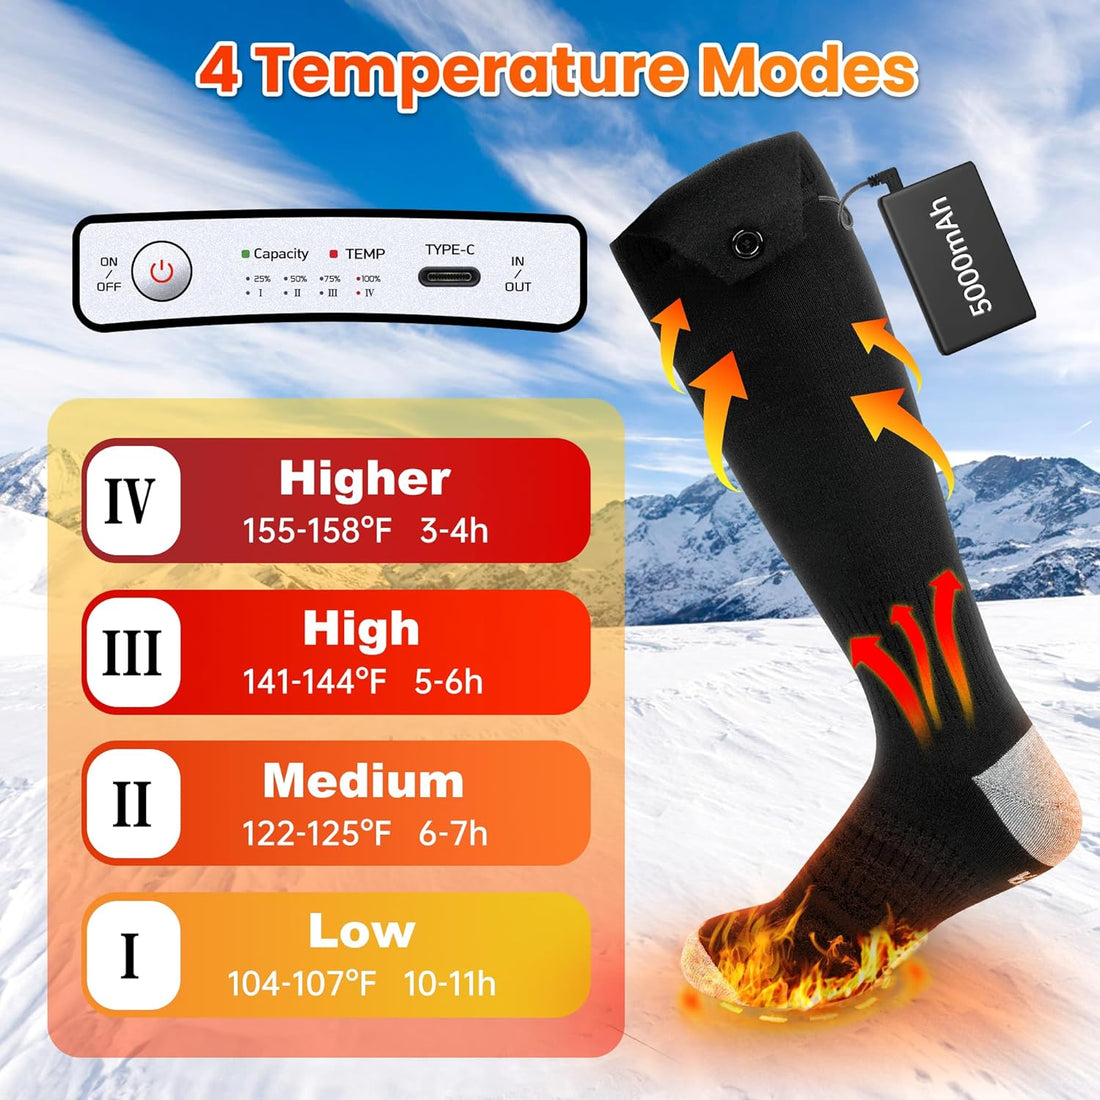 Heated Socks for Men Women with APP Control,5000mAh Rechargeable Electric Heated Socks,4 Heating Settings,Outdoor Camping Skiing Hunting